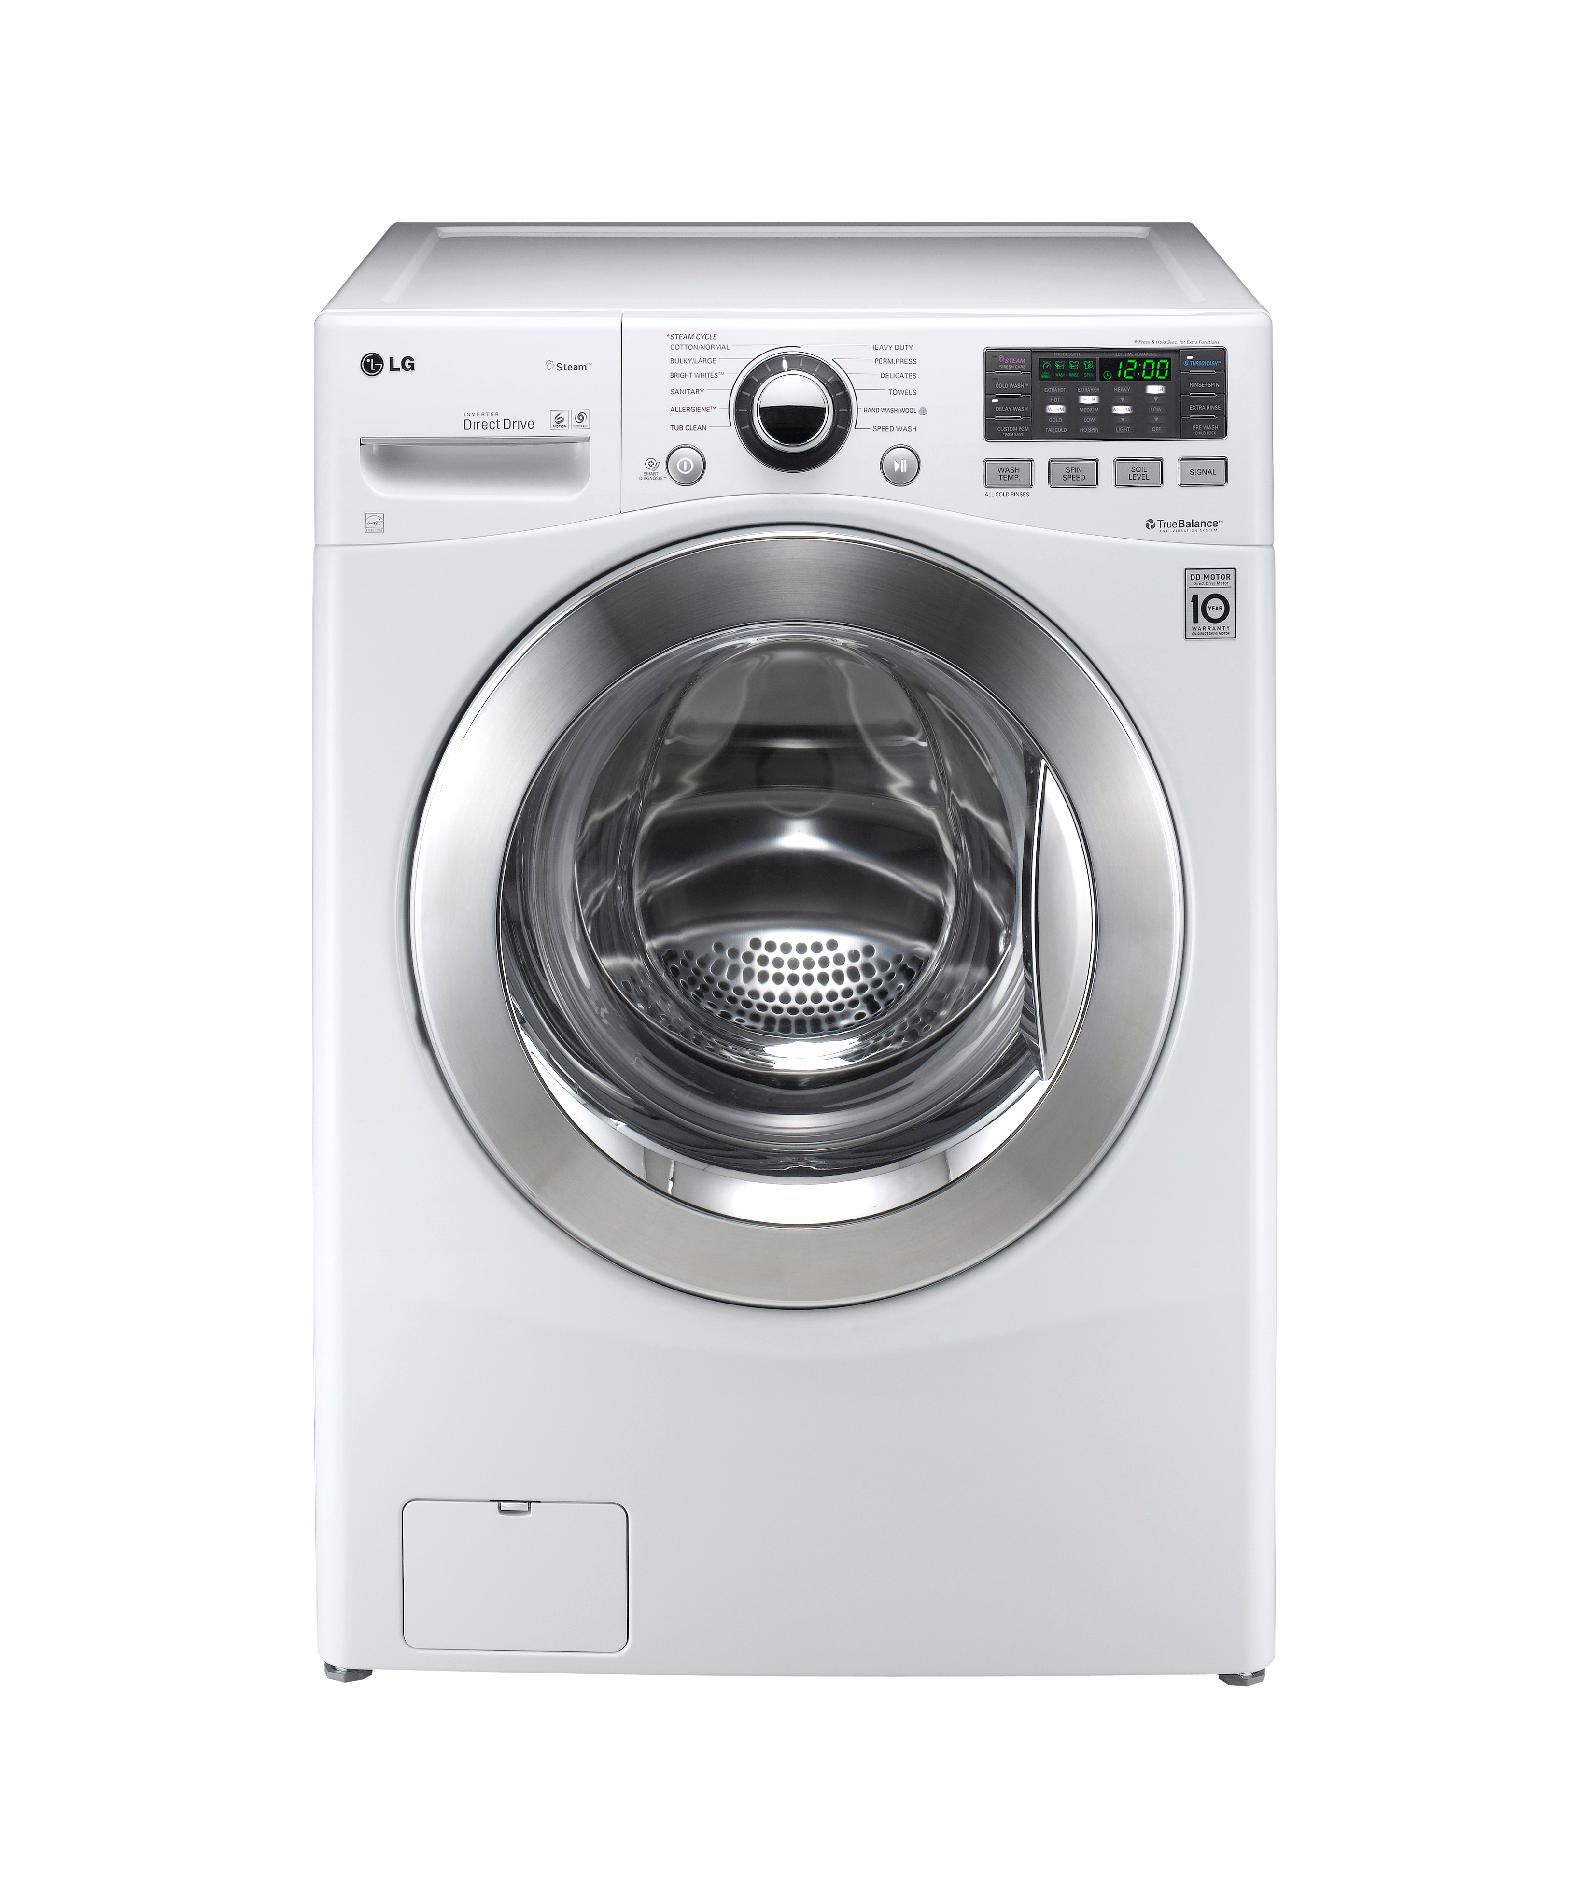 LG 3.7 cu. ft. Steam Front-Load Washer - White